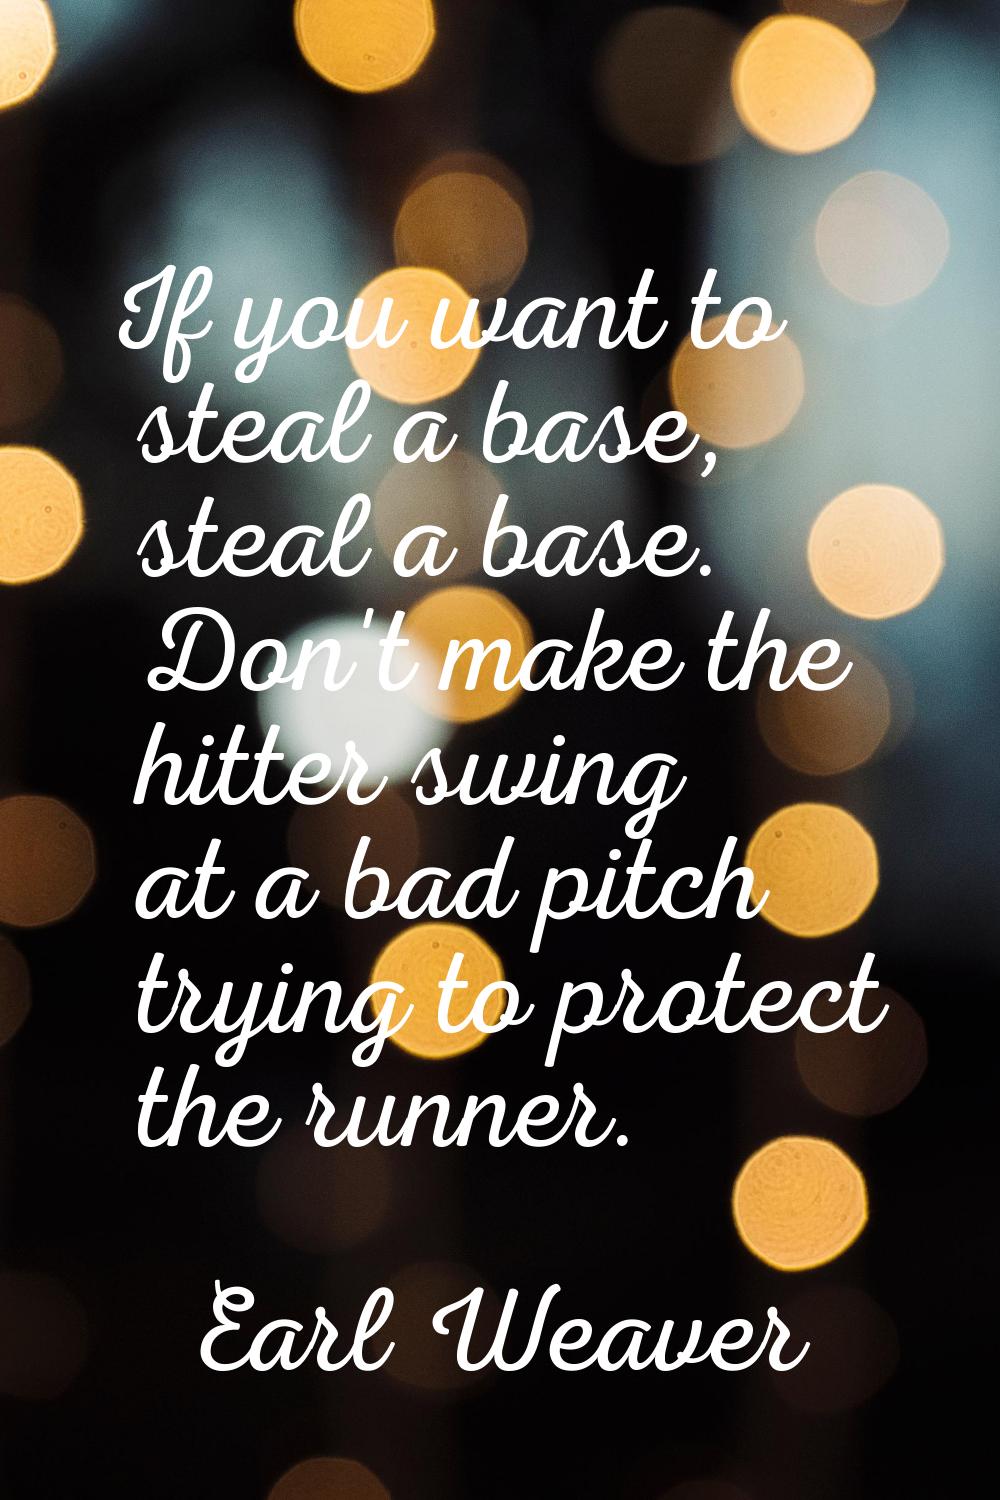 If you want to steal a base, steal a base. Don't make the hitter swing at a bad pitch trying to pro